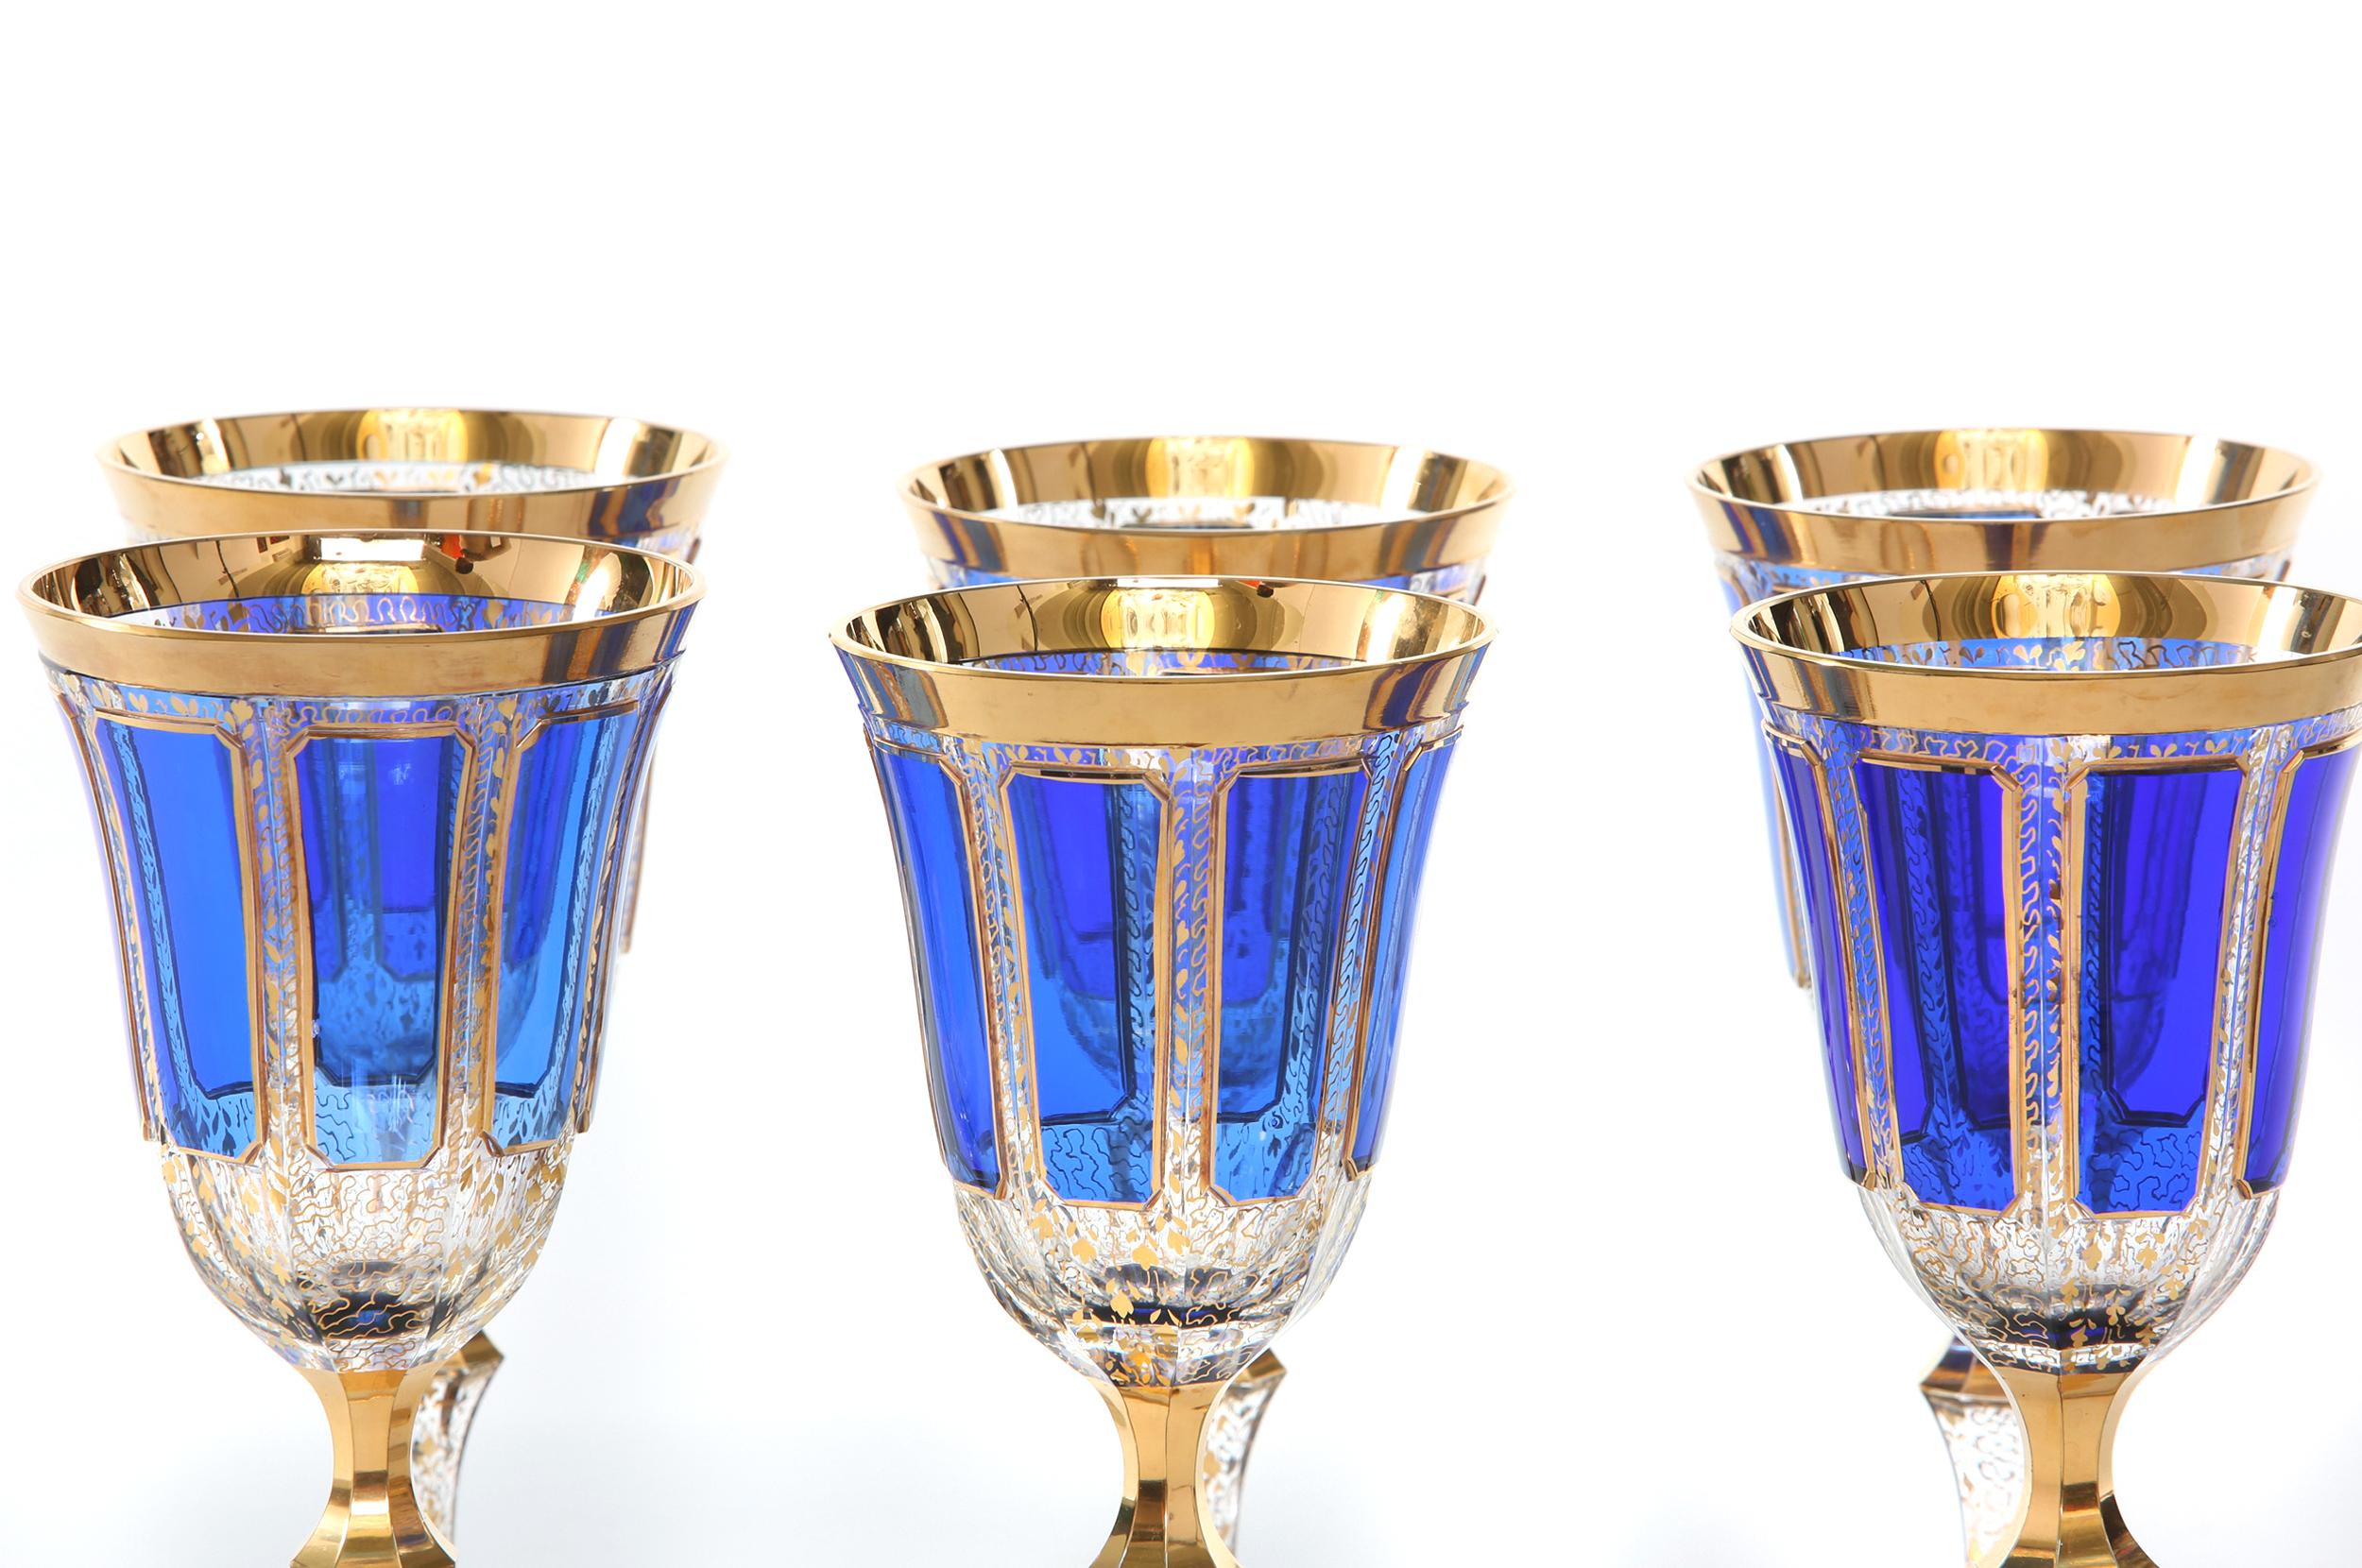 Moser crystal Bohemian hand blown panel cut cobalt blue with gold design details wine / water glassware service for six people. Each glass is in great vintage condition. Minor wear consistent with age / use. Each glass stands about 8.4 inches tall x